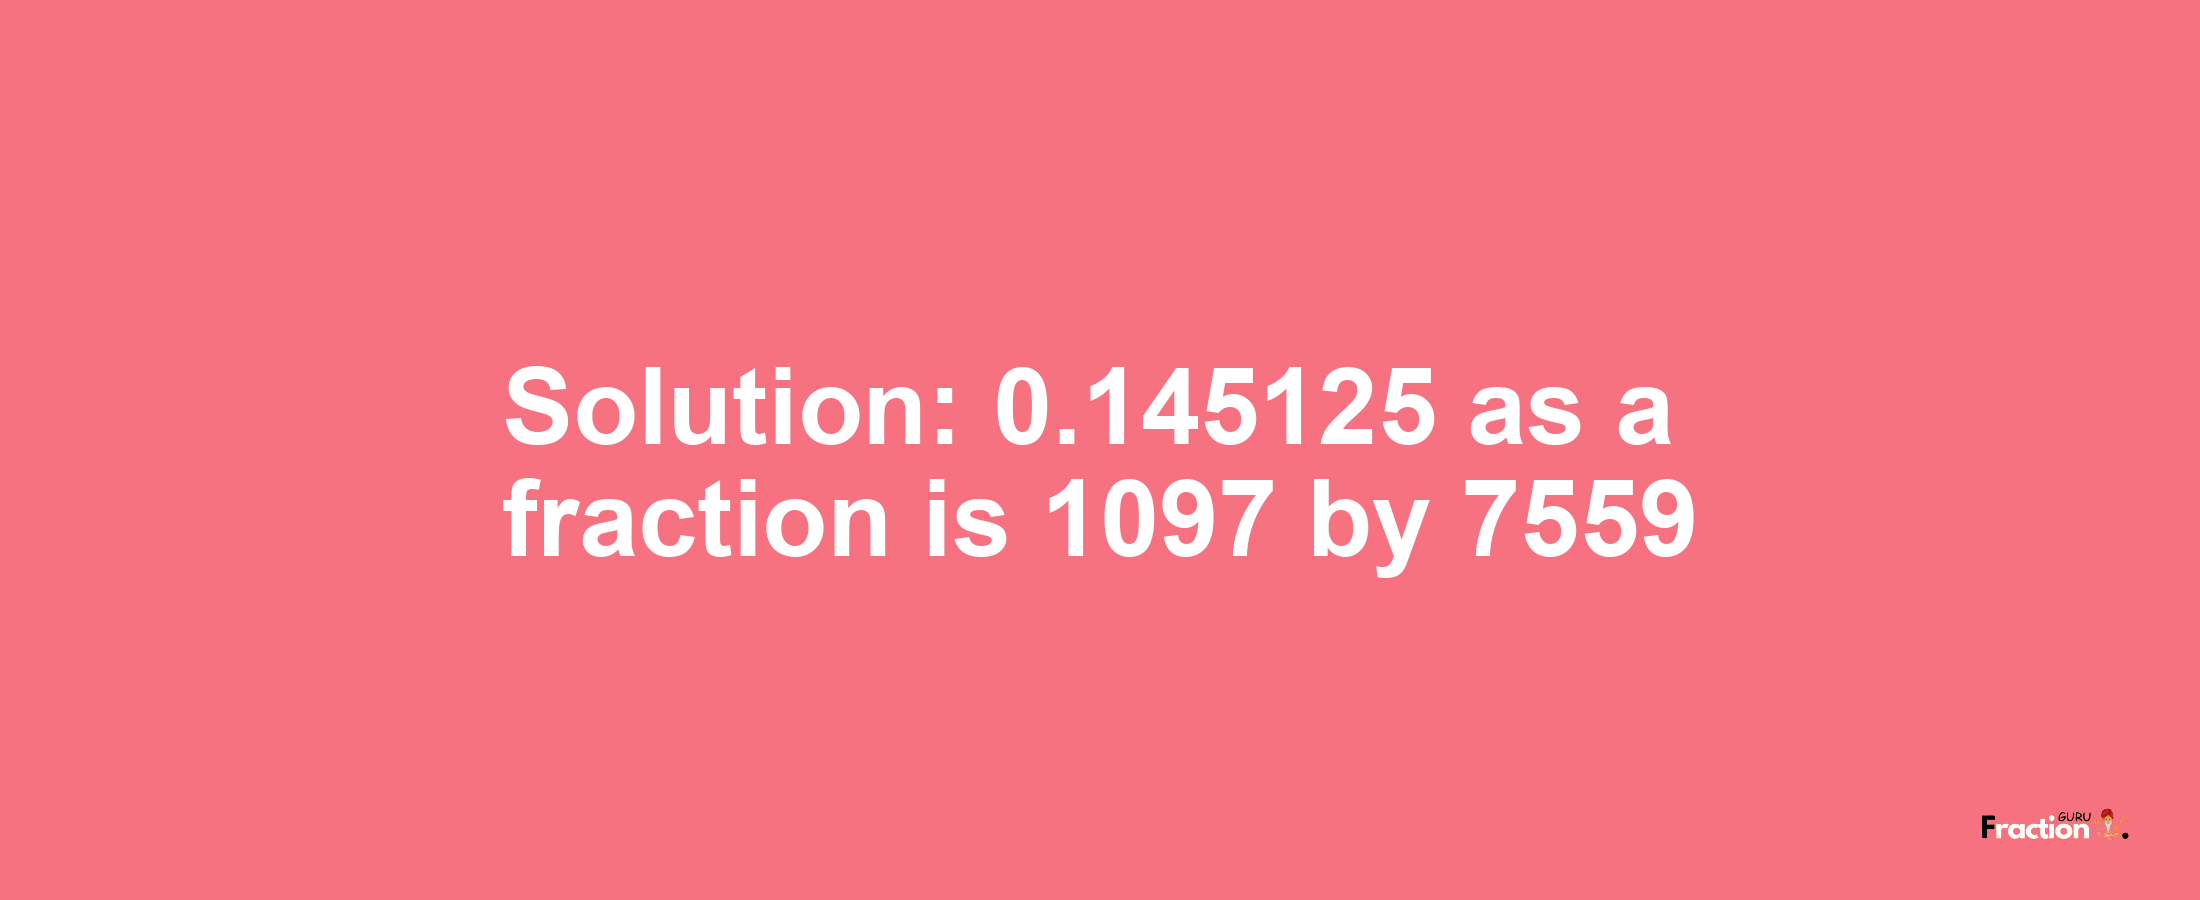 Solution:0.145125 as a fraction is 1097/7559